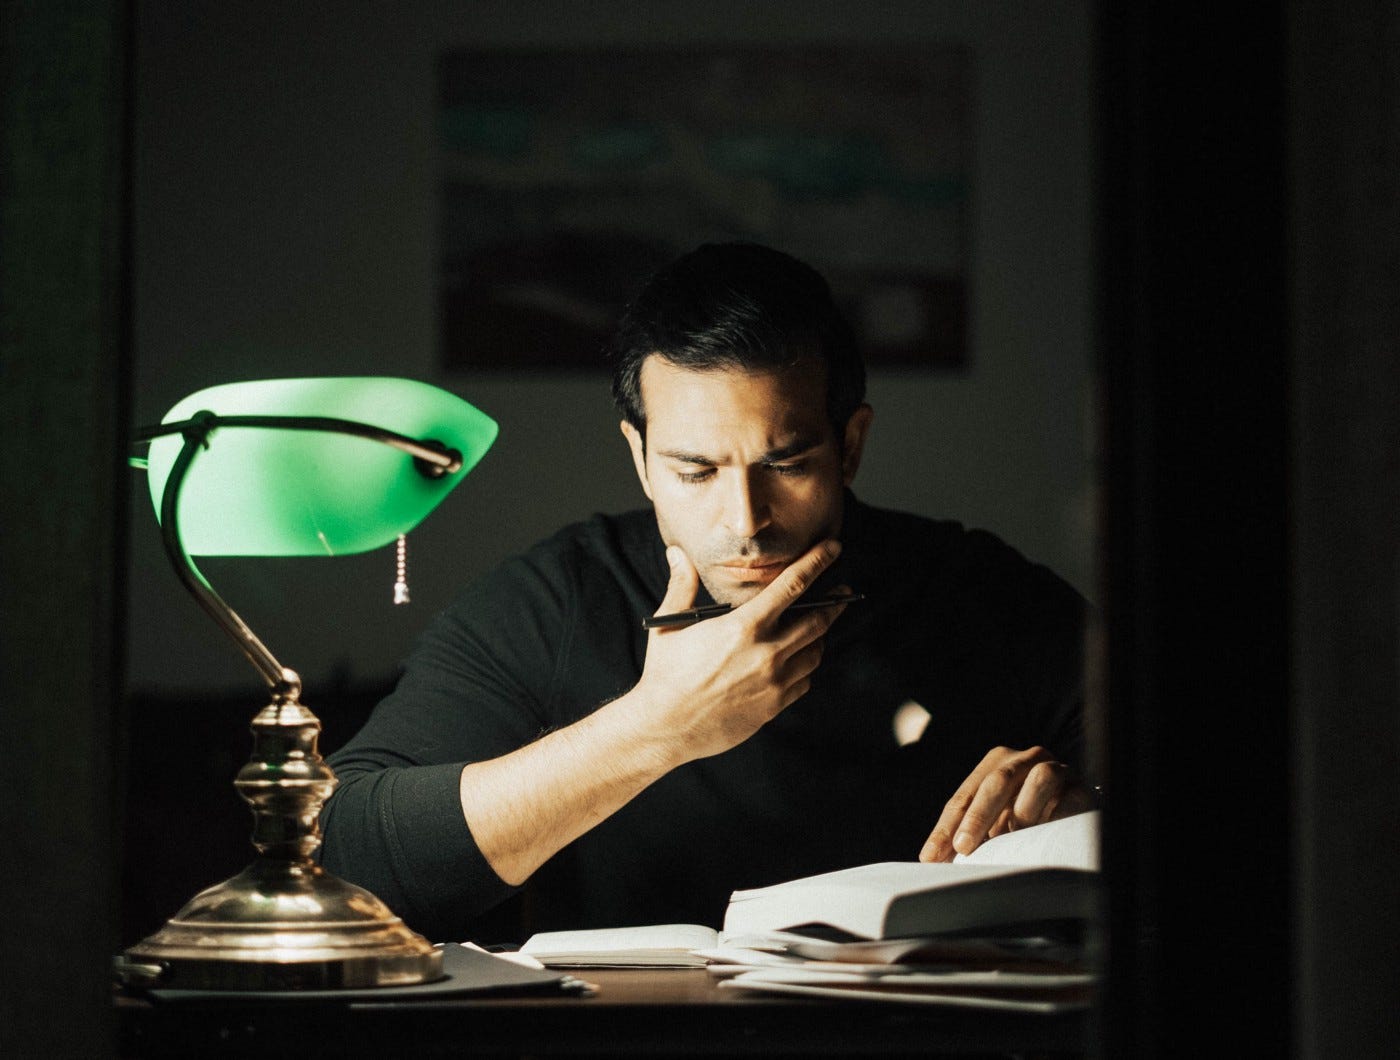 Thoughtful man in a black turtleneck studying by a night lamp